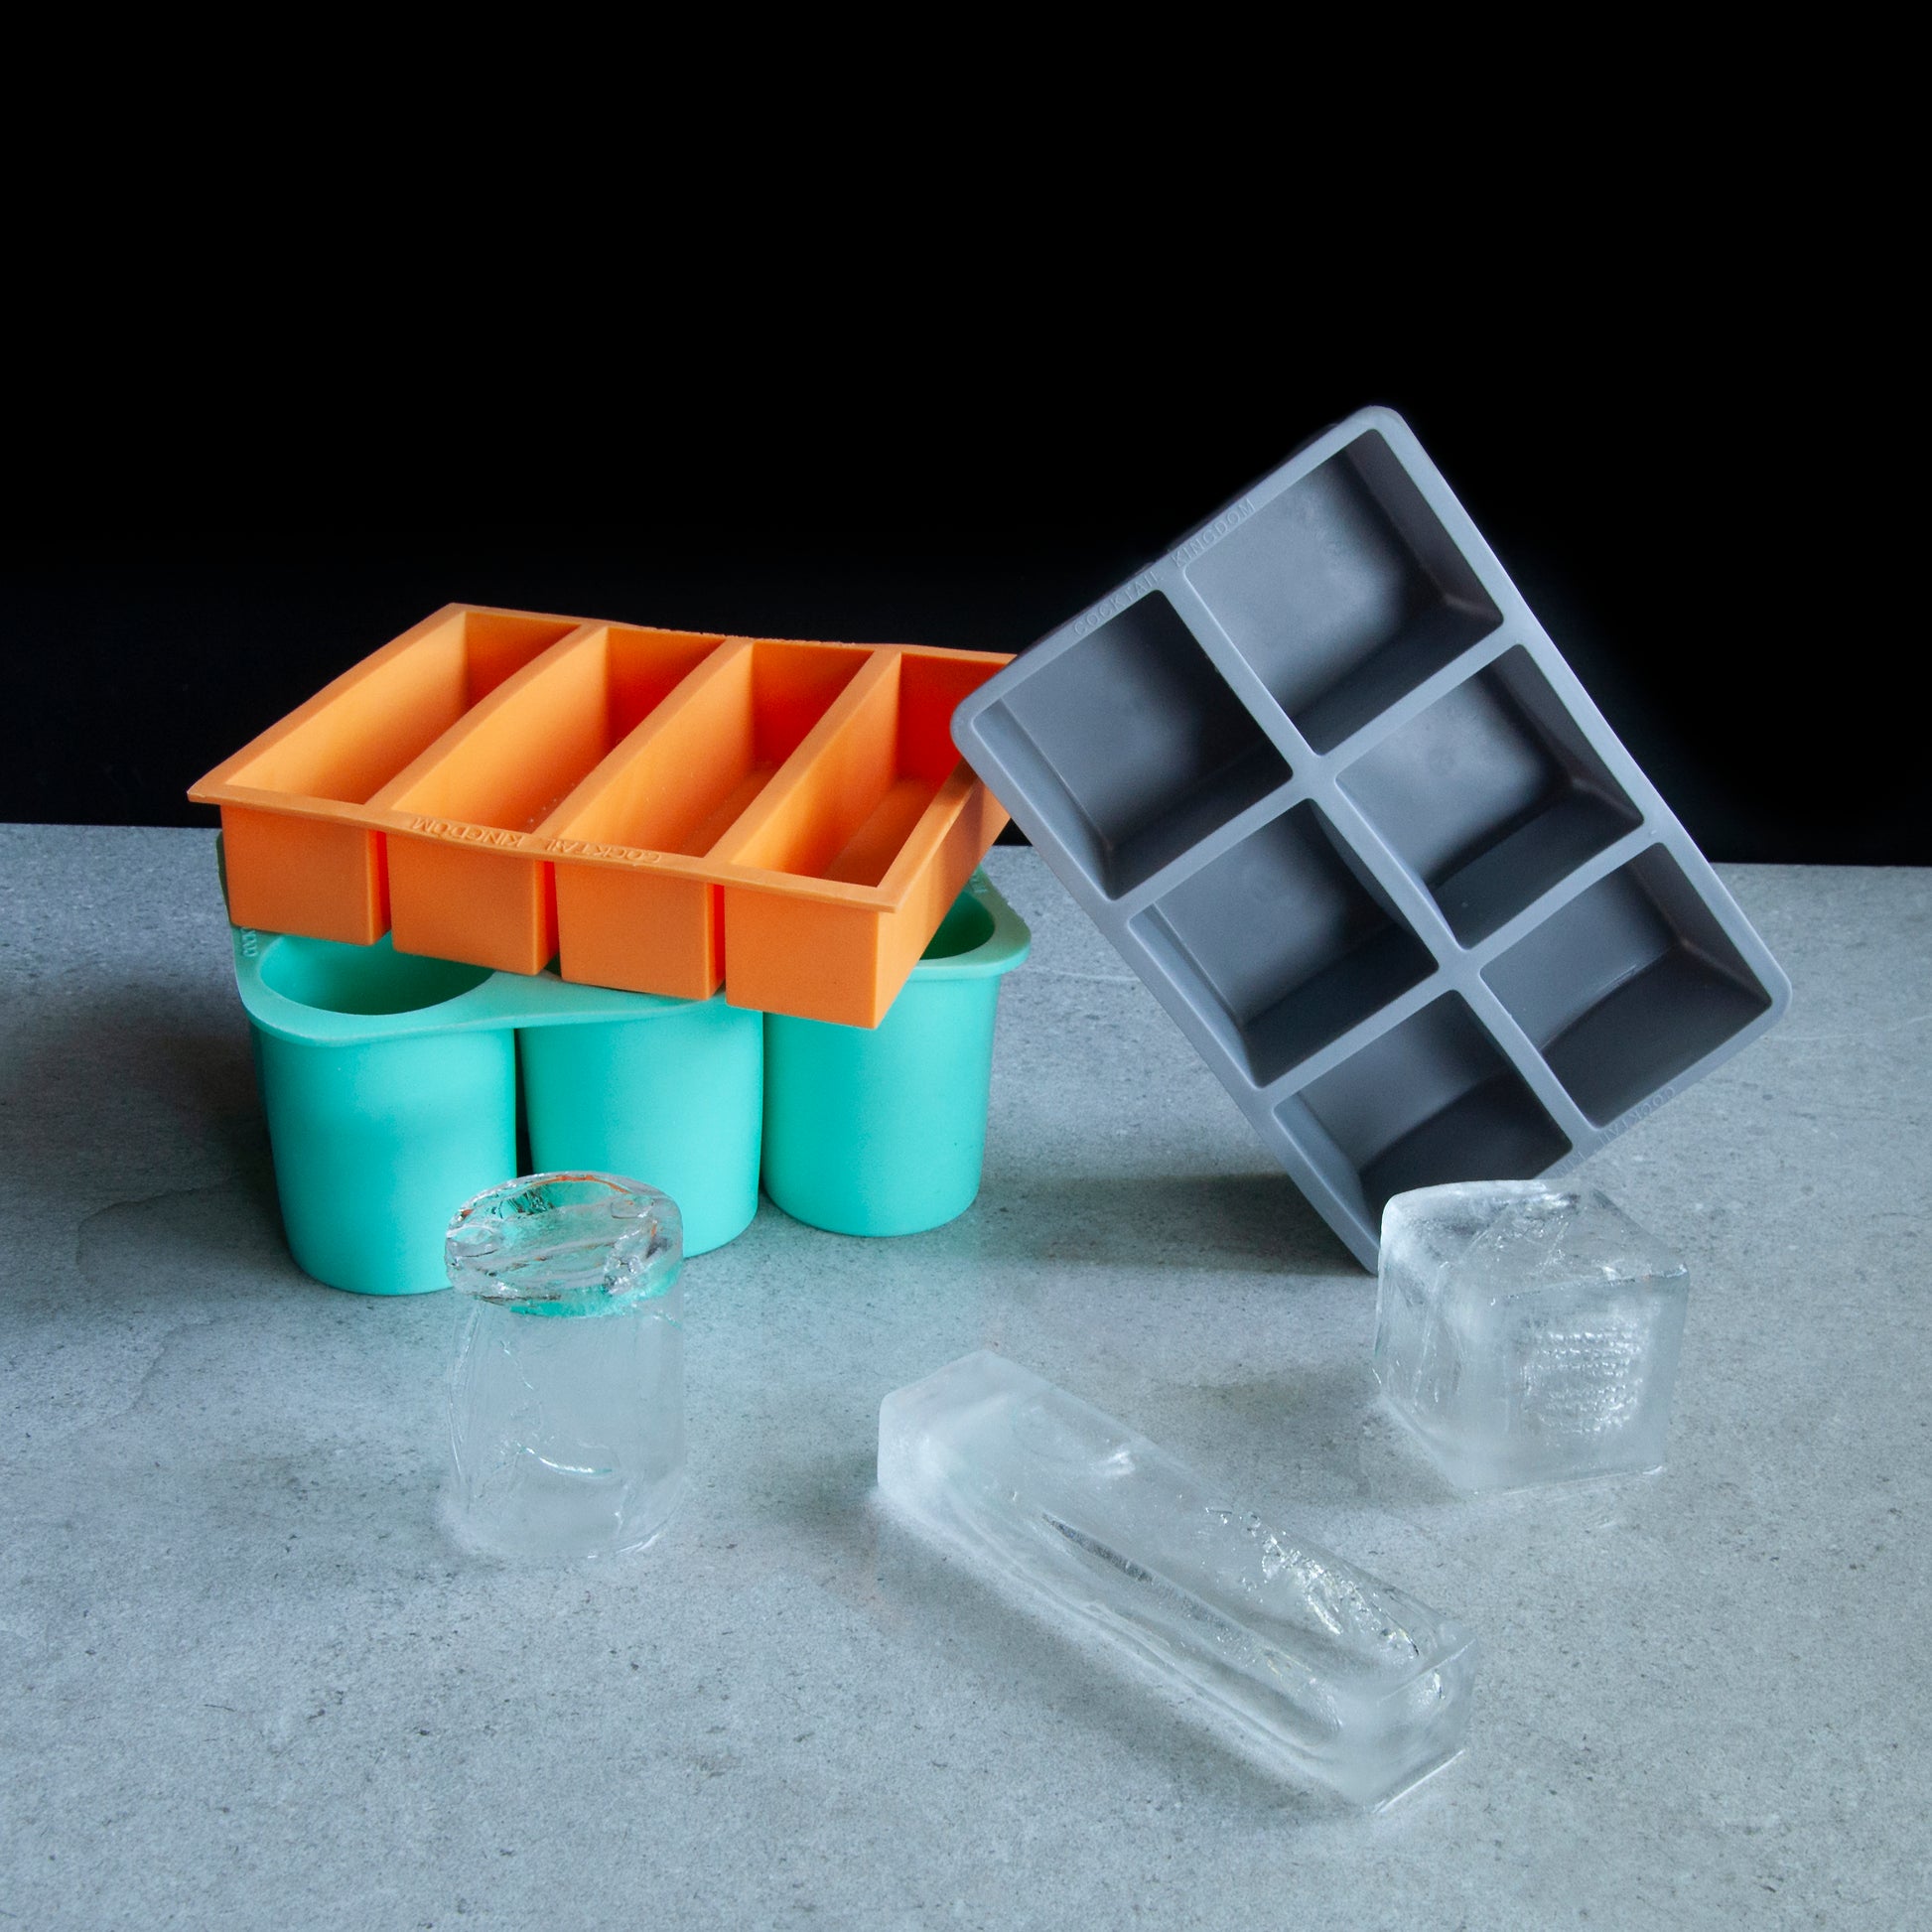 Buy silicone ice cube tray with cover lid at best price in Pakistan